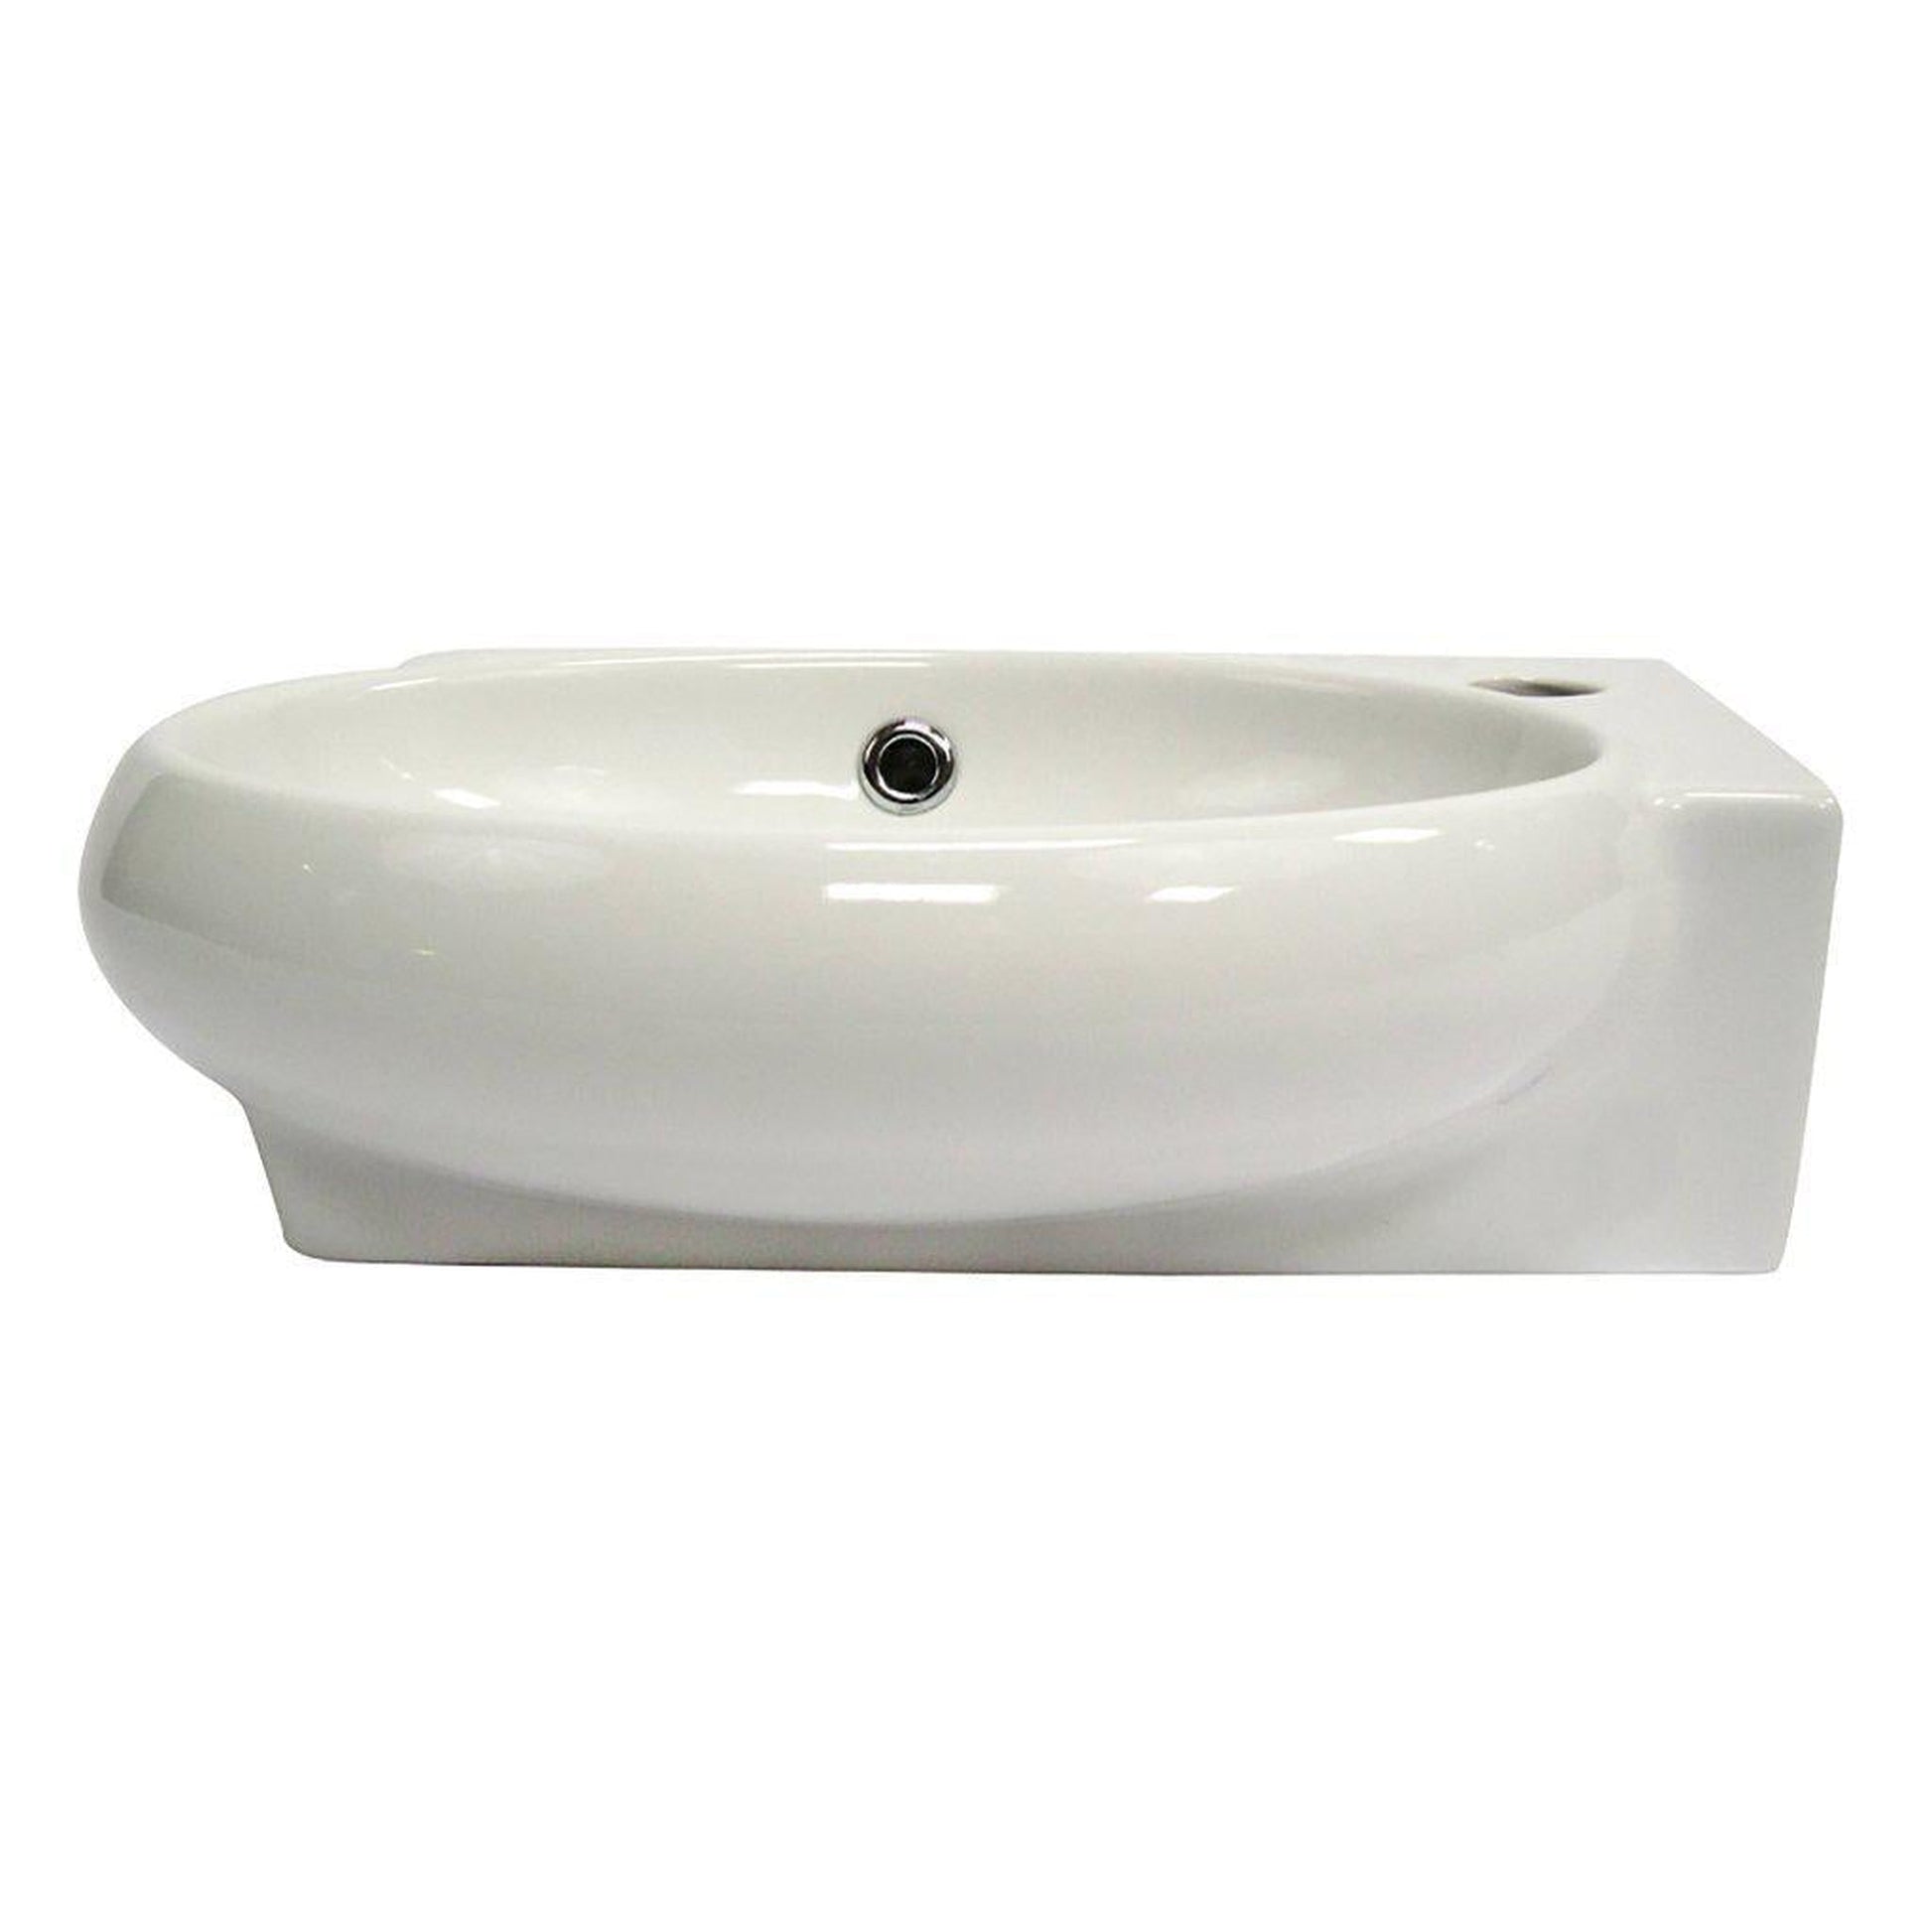 ALFI Brand AB107 17" White Wall-Mounted Euro Styled Oval Ceramic Bathroom Sink With Single Faucet Hole and Overflow